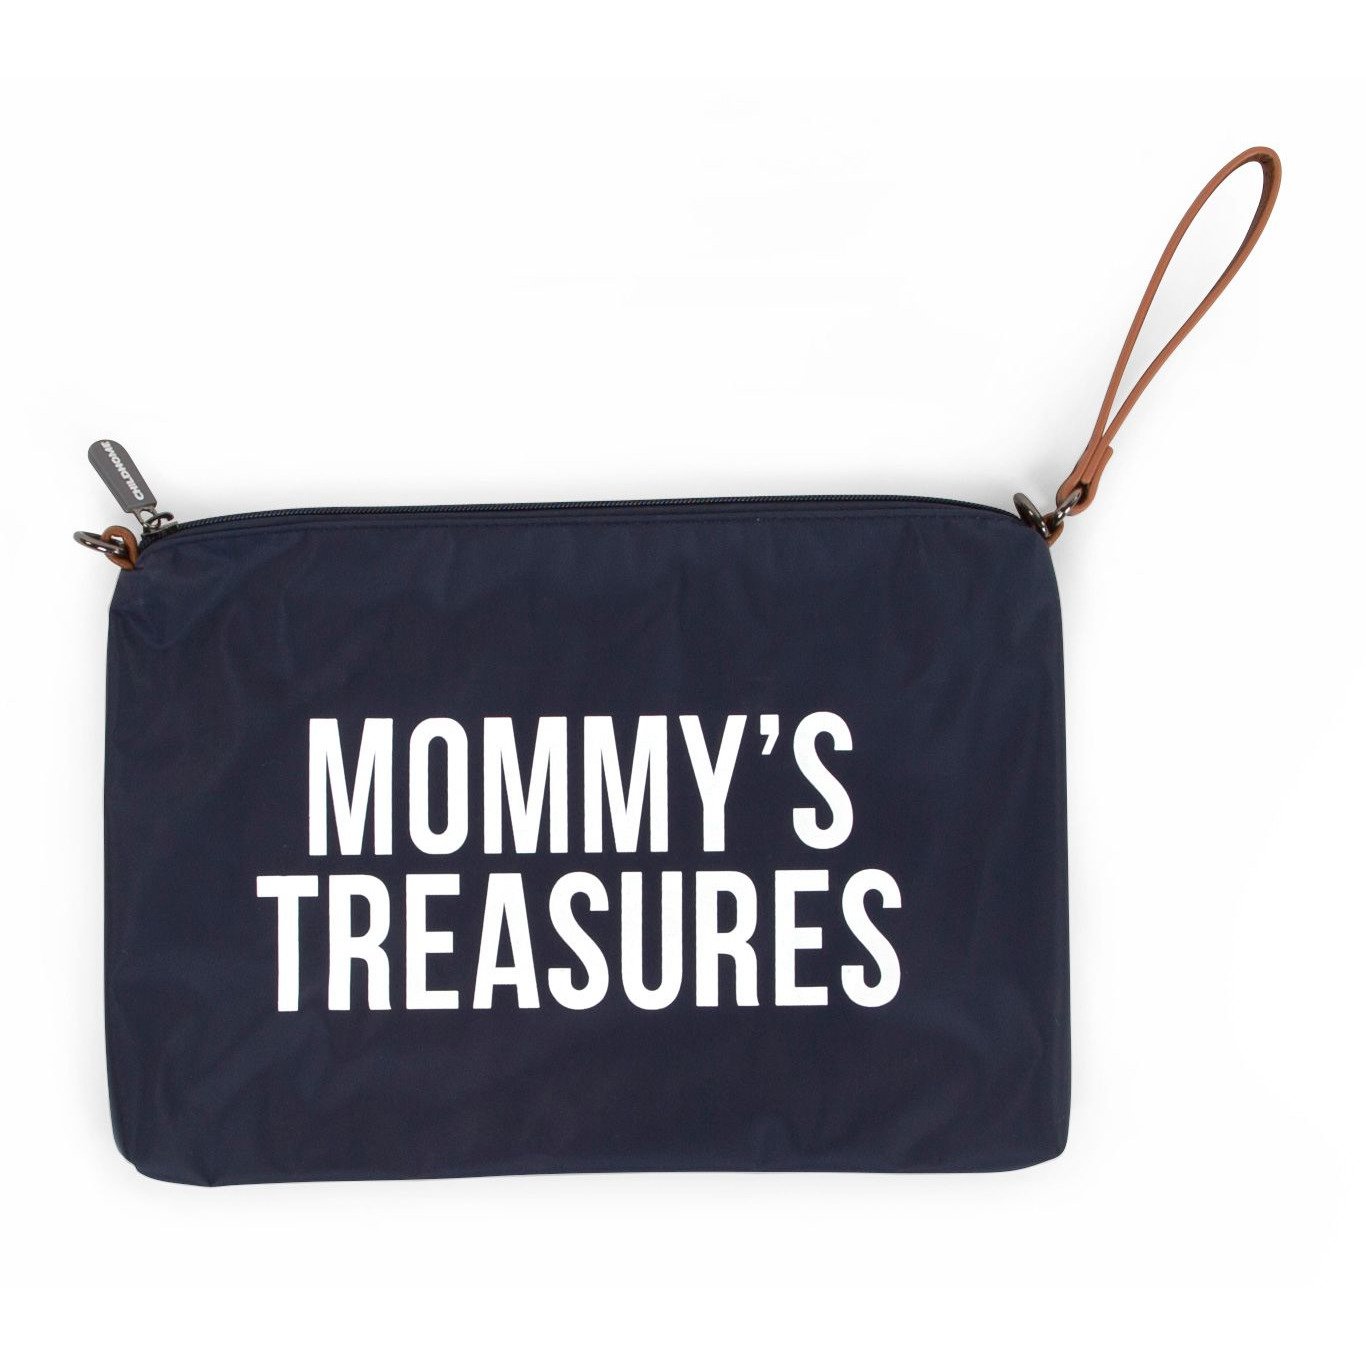 ChildHome Mommy's Treasures Clutch - Navy